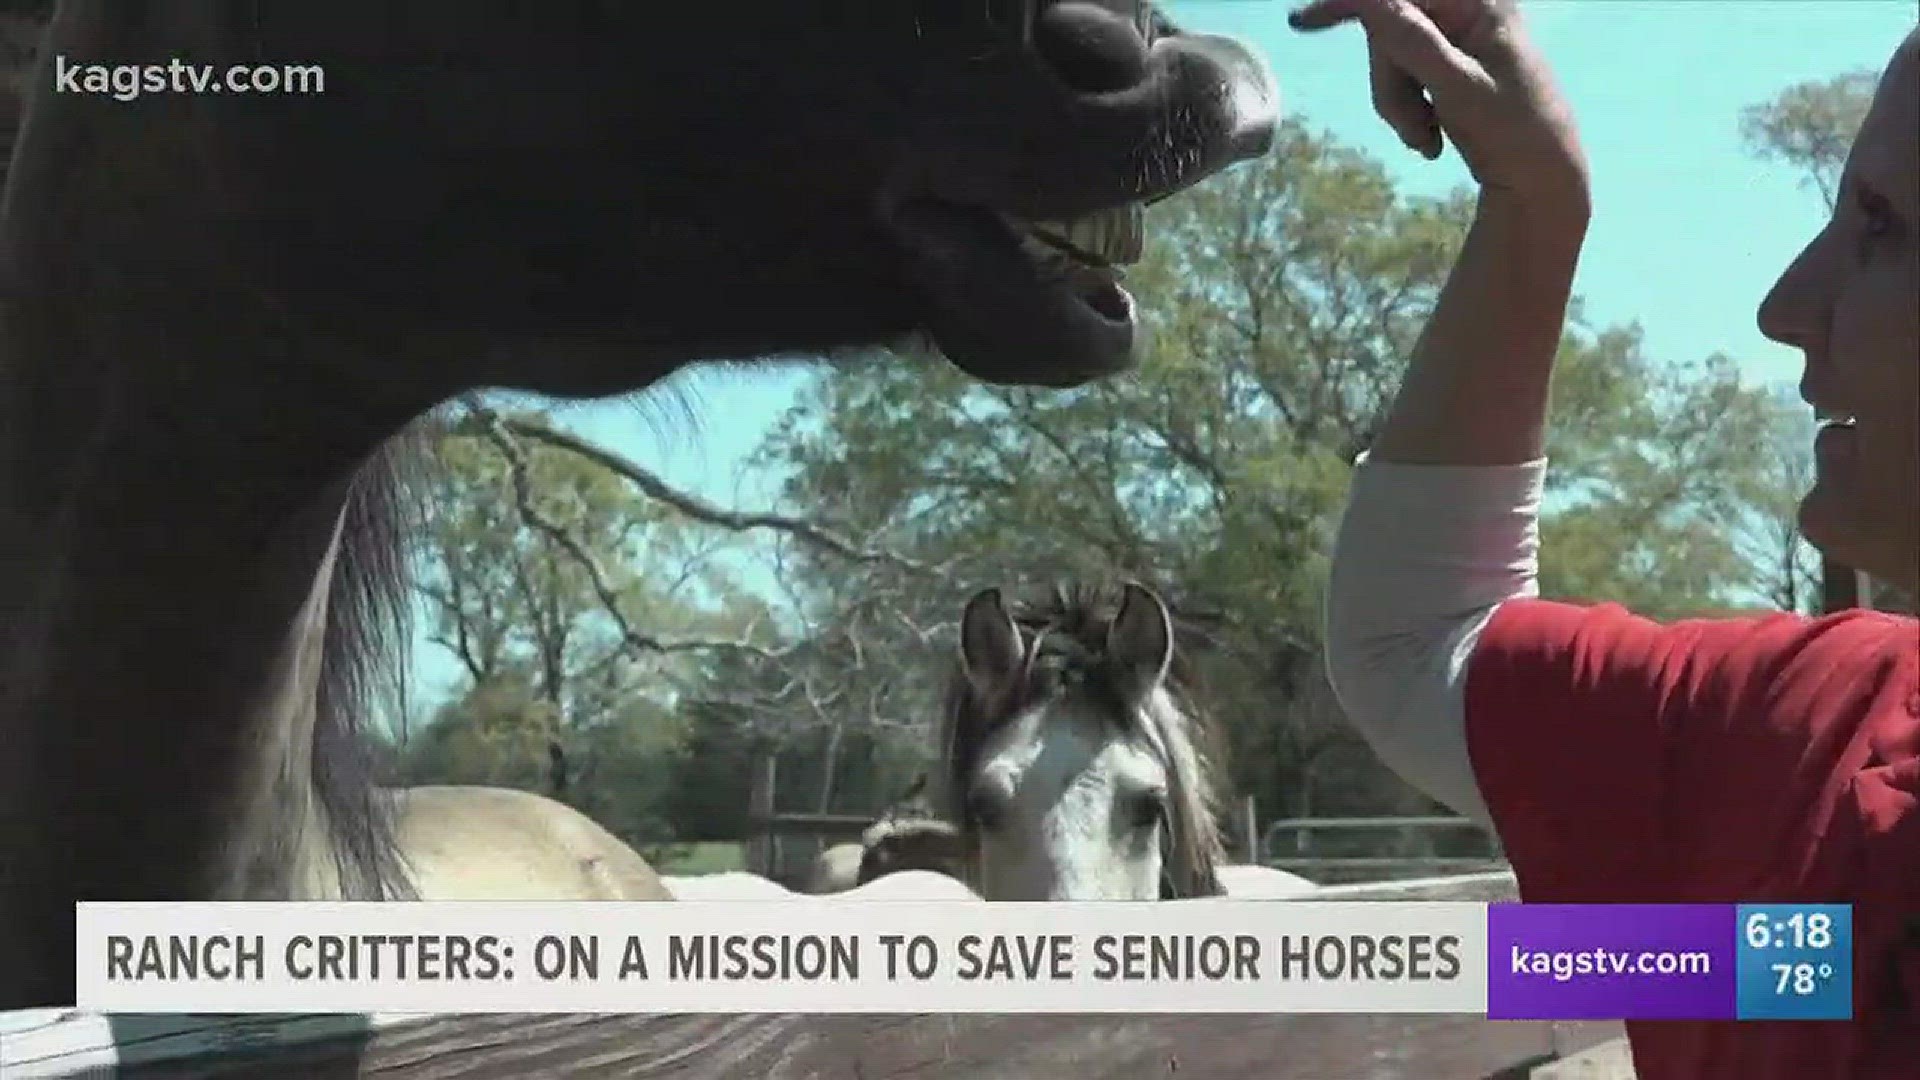 Ranch Critters is on a mission to save senior horses.